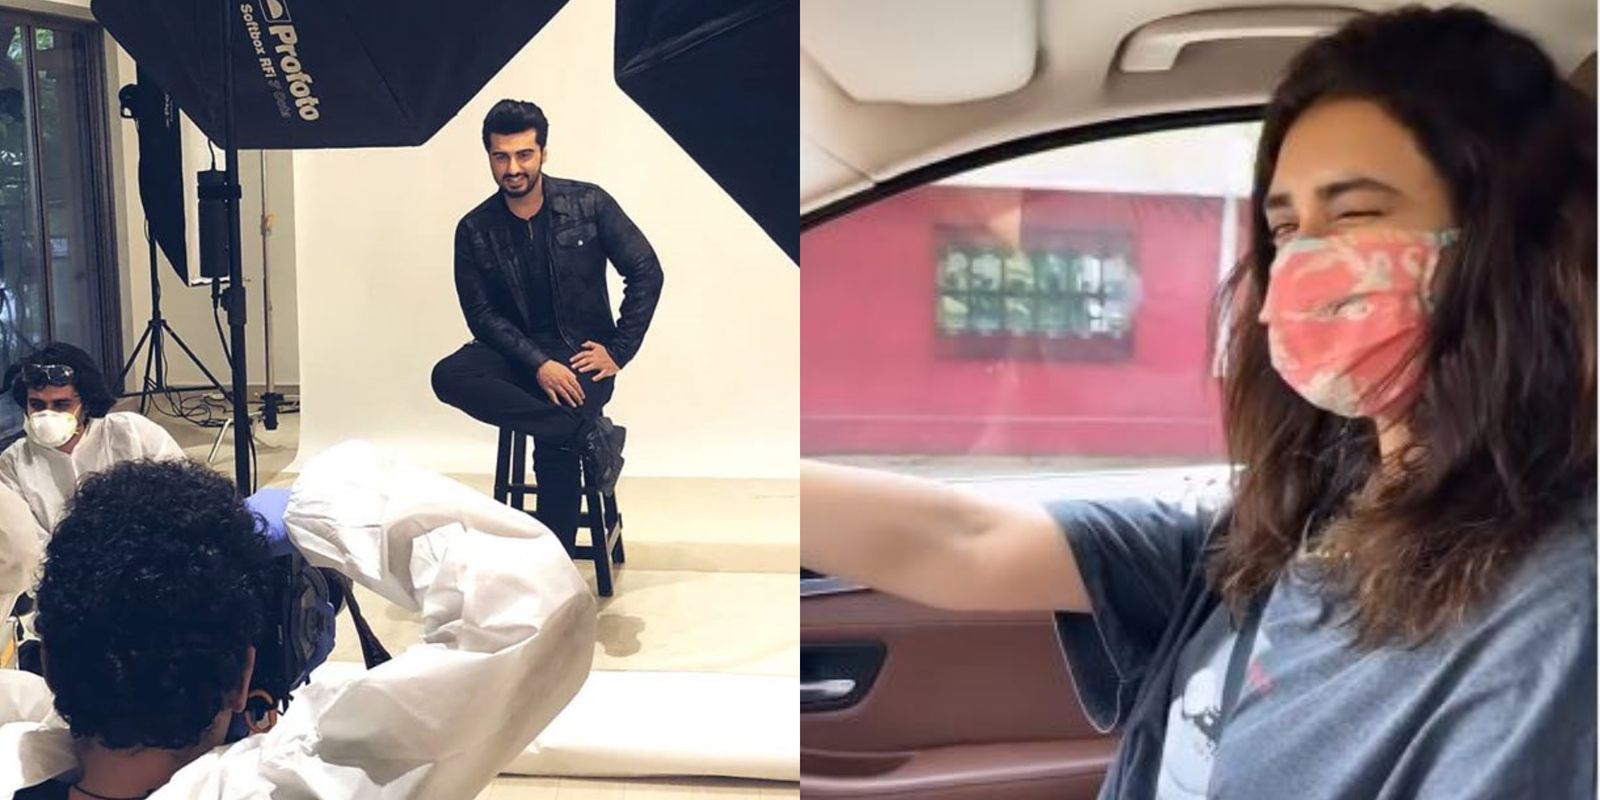 Arjun Kapoor Accepts The 'New World Order' As He Resumes Work; Karishma Tanna Drives To Work After 4 Months